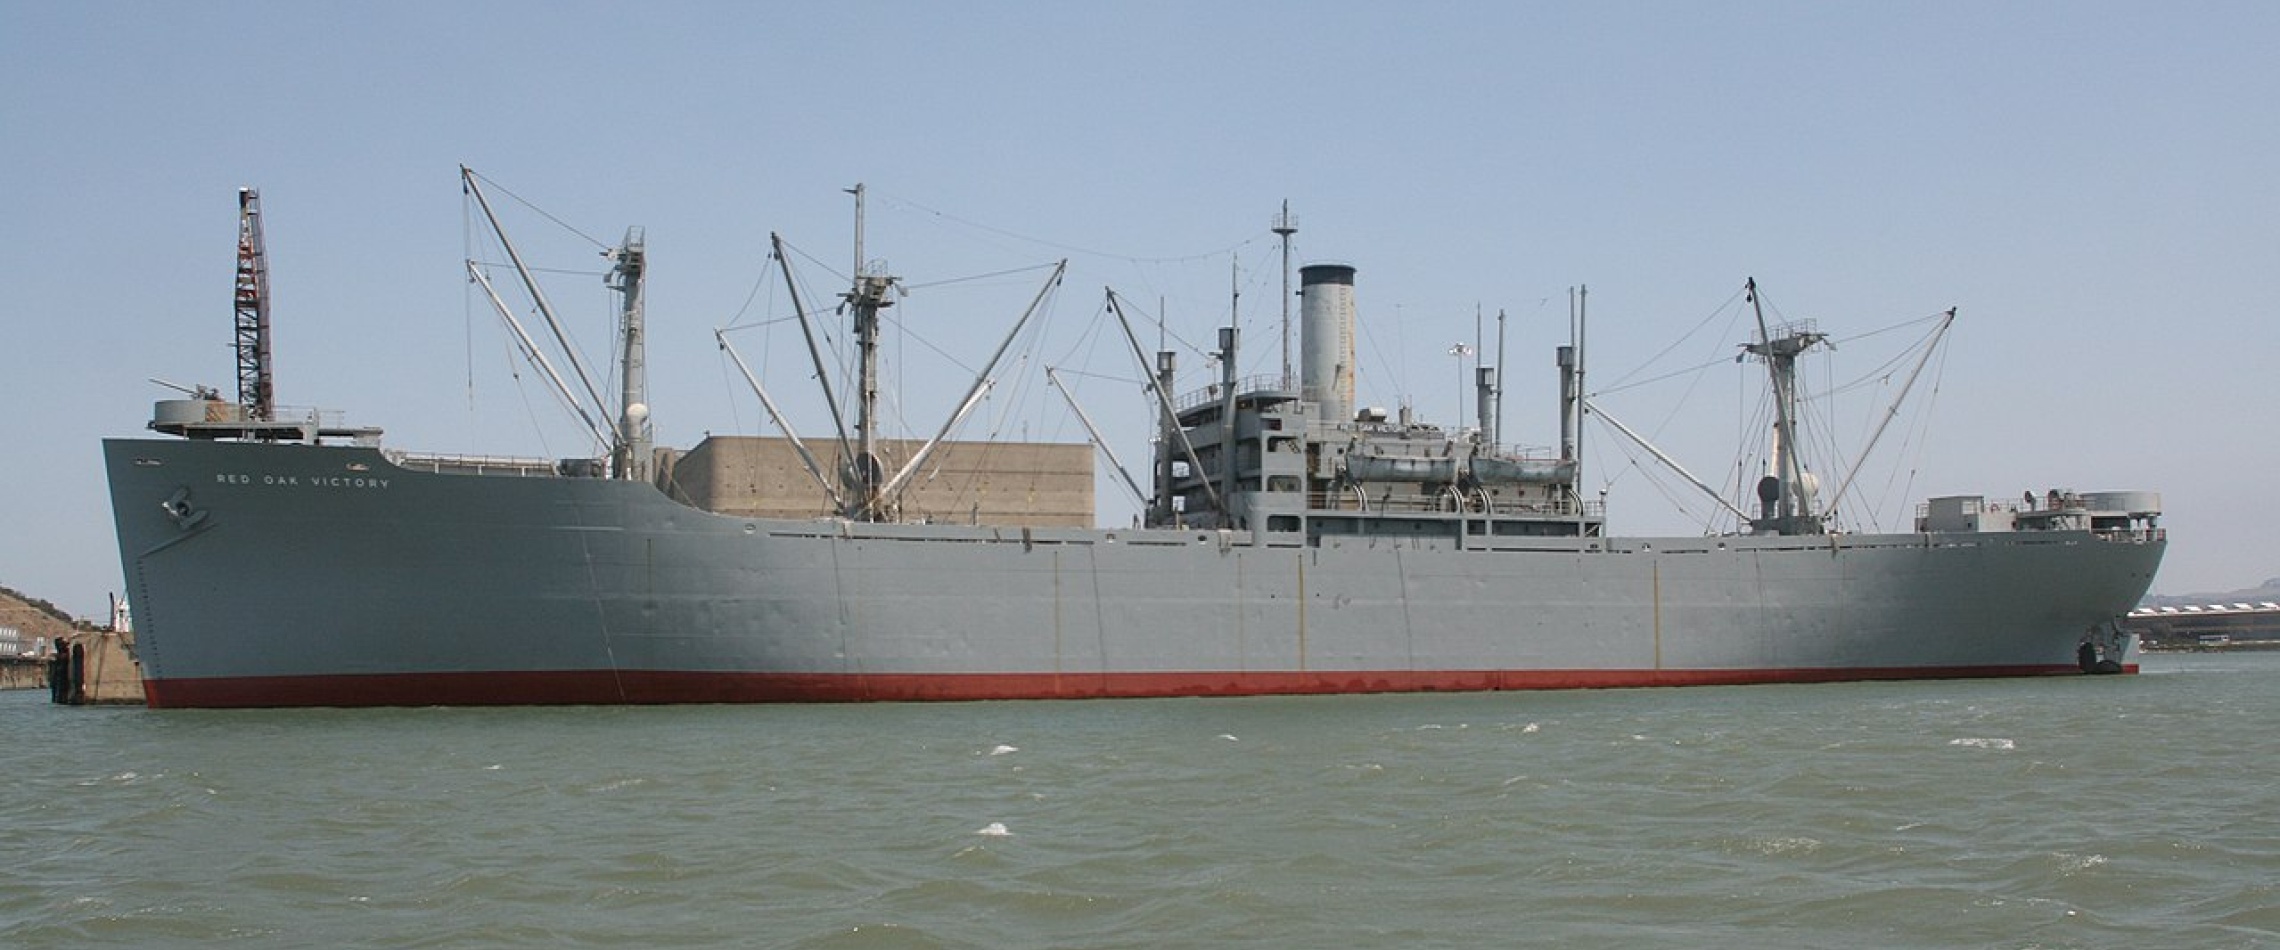 The SS Red Oak Victory in 2013, after repair and refurbishment in 2011. At the time of this image, she is the last operational Victory ship in the world. Used extensively during World War II for transport of various goods, the Victory class was a faster a